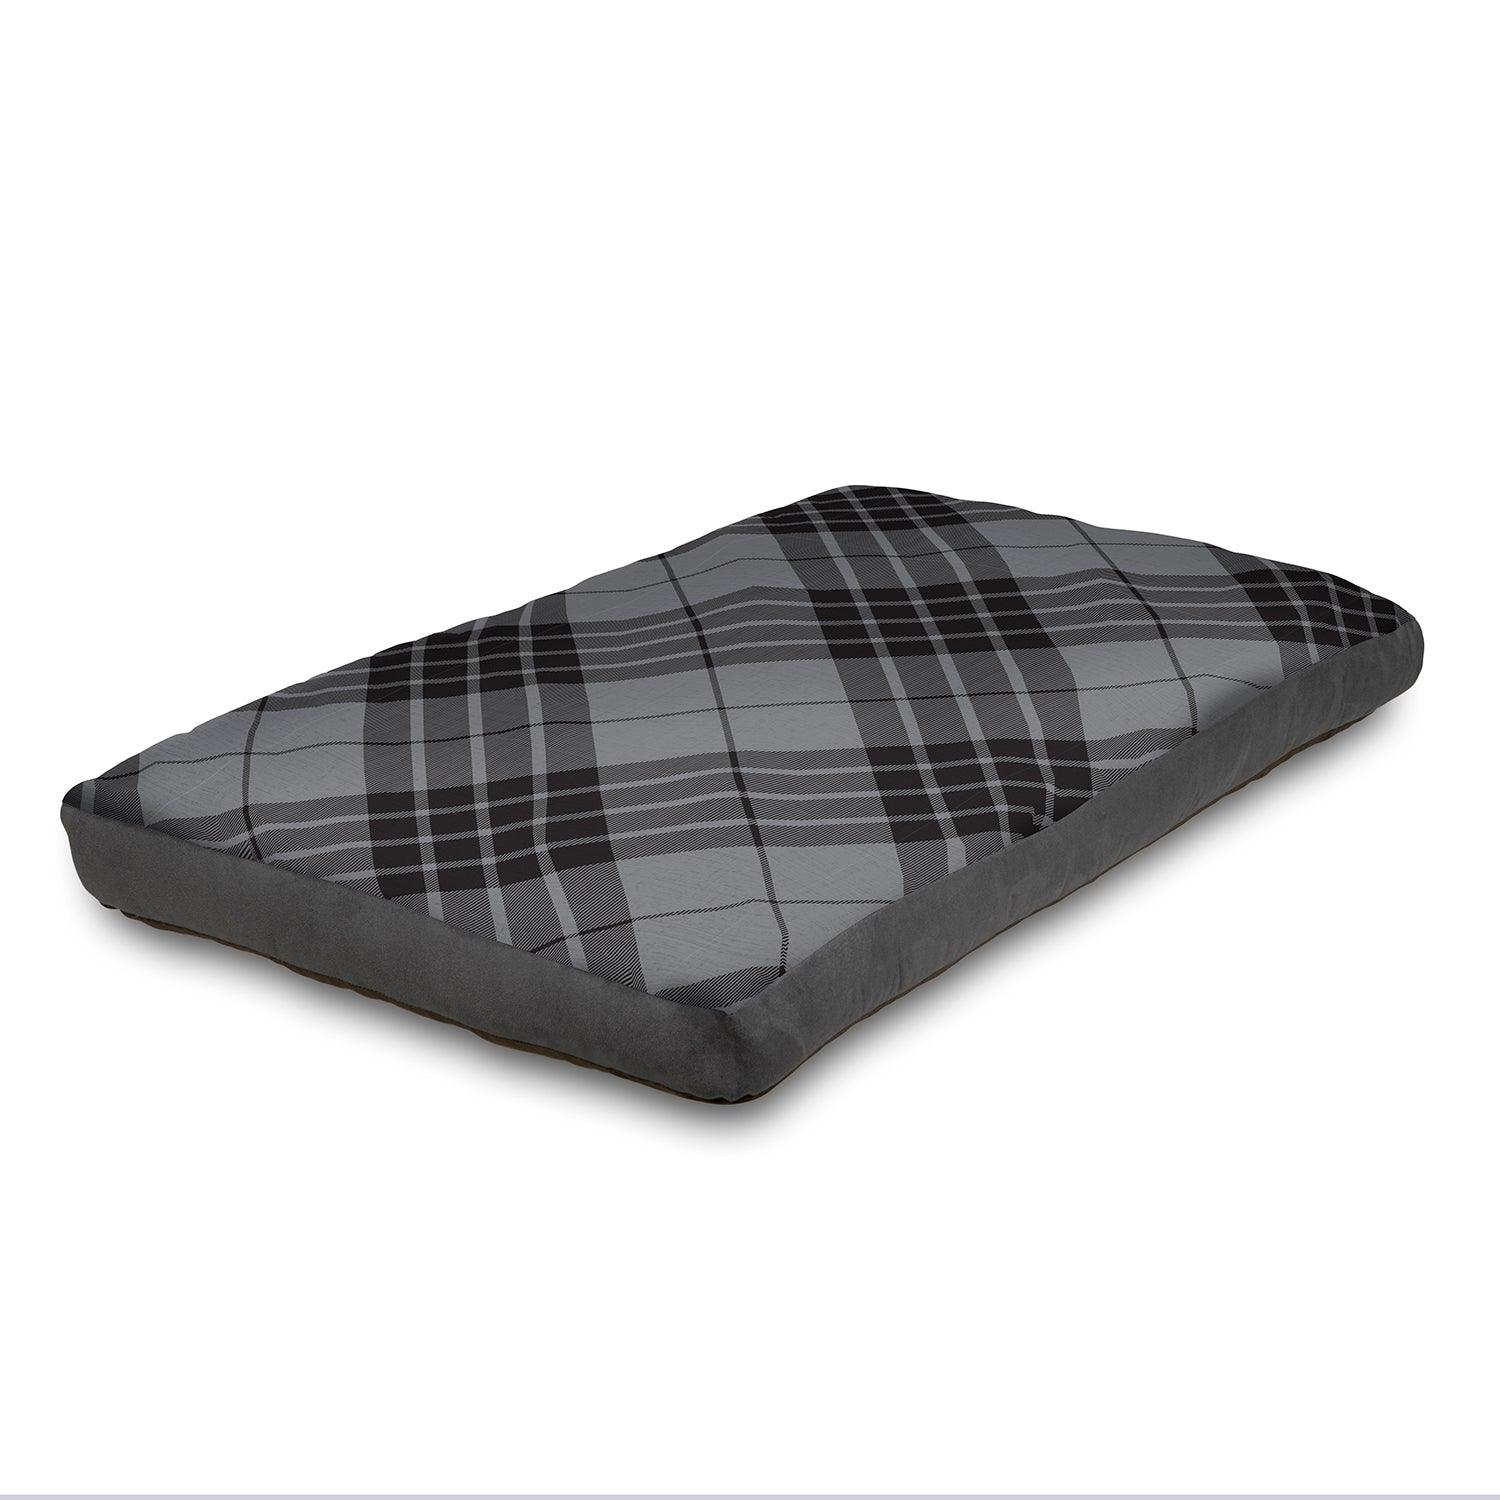 View Super Comfy Dog Bed Soft and Fluffy with Washable Cover Large 125 cm x 85 cm Black information